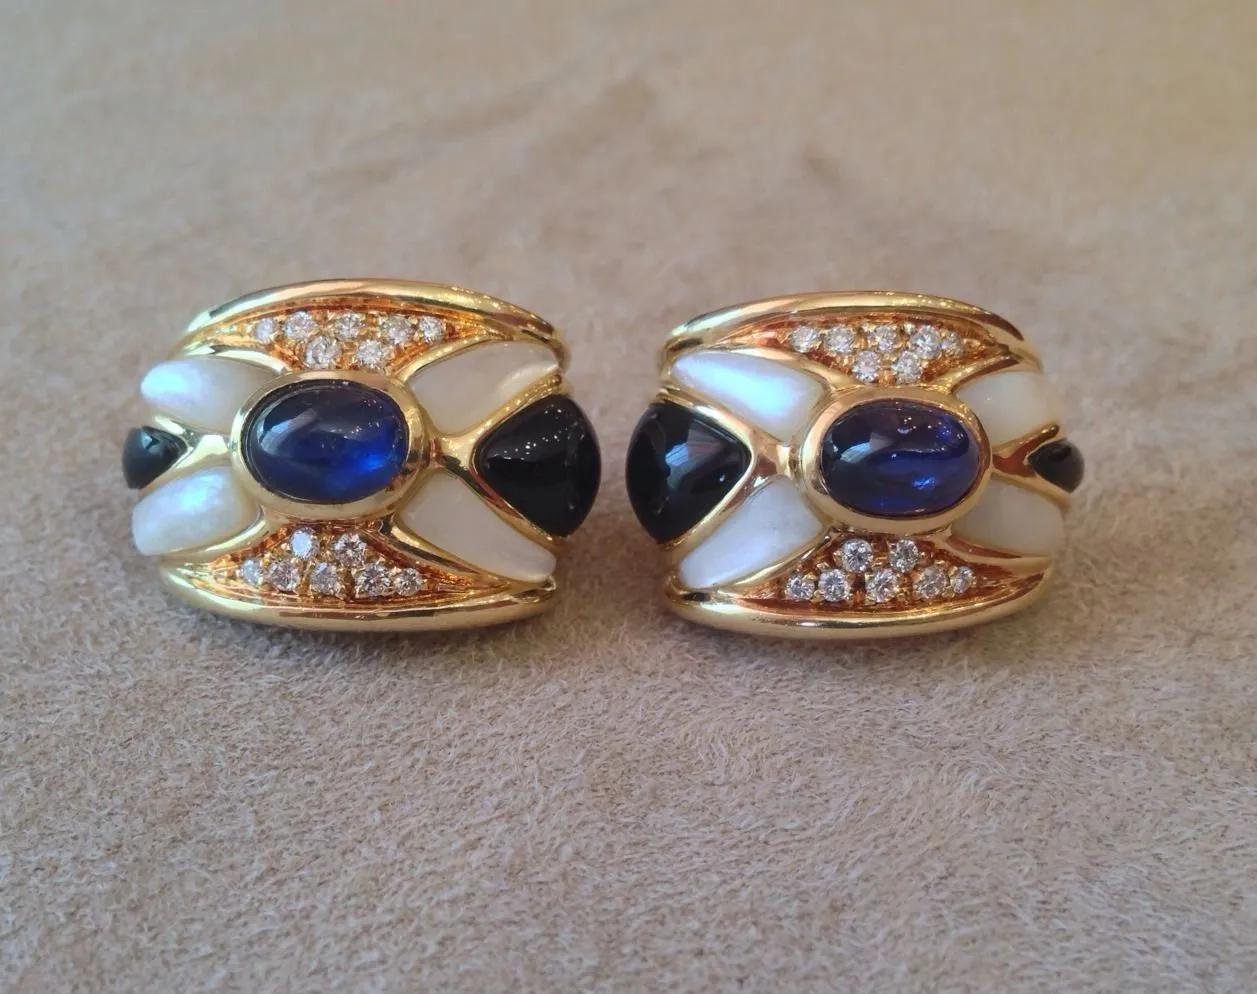 Sapphire, Diamond, and Onyx Earrings in 18K Yellow Gold In Excellent Condition For Sale In La Jolla, CA